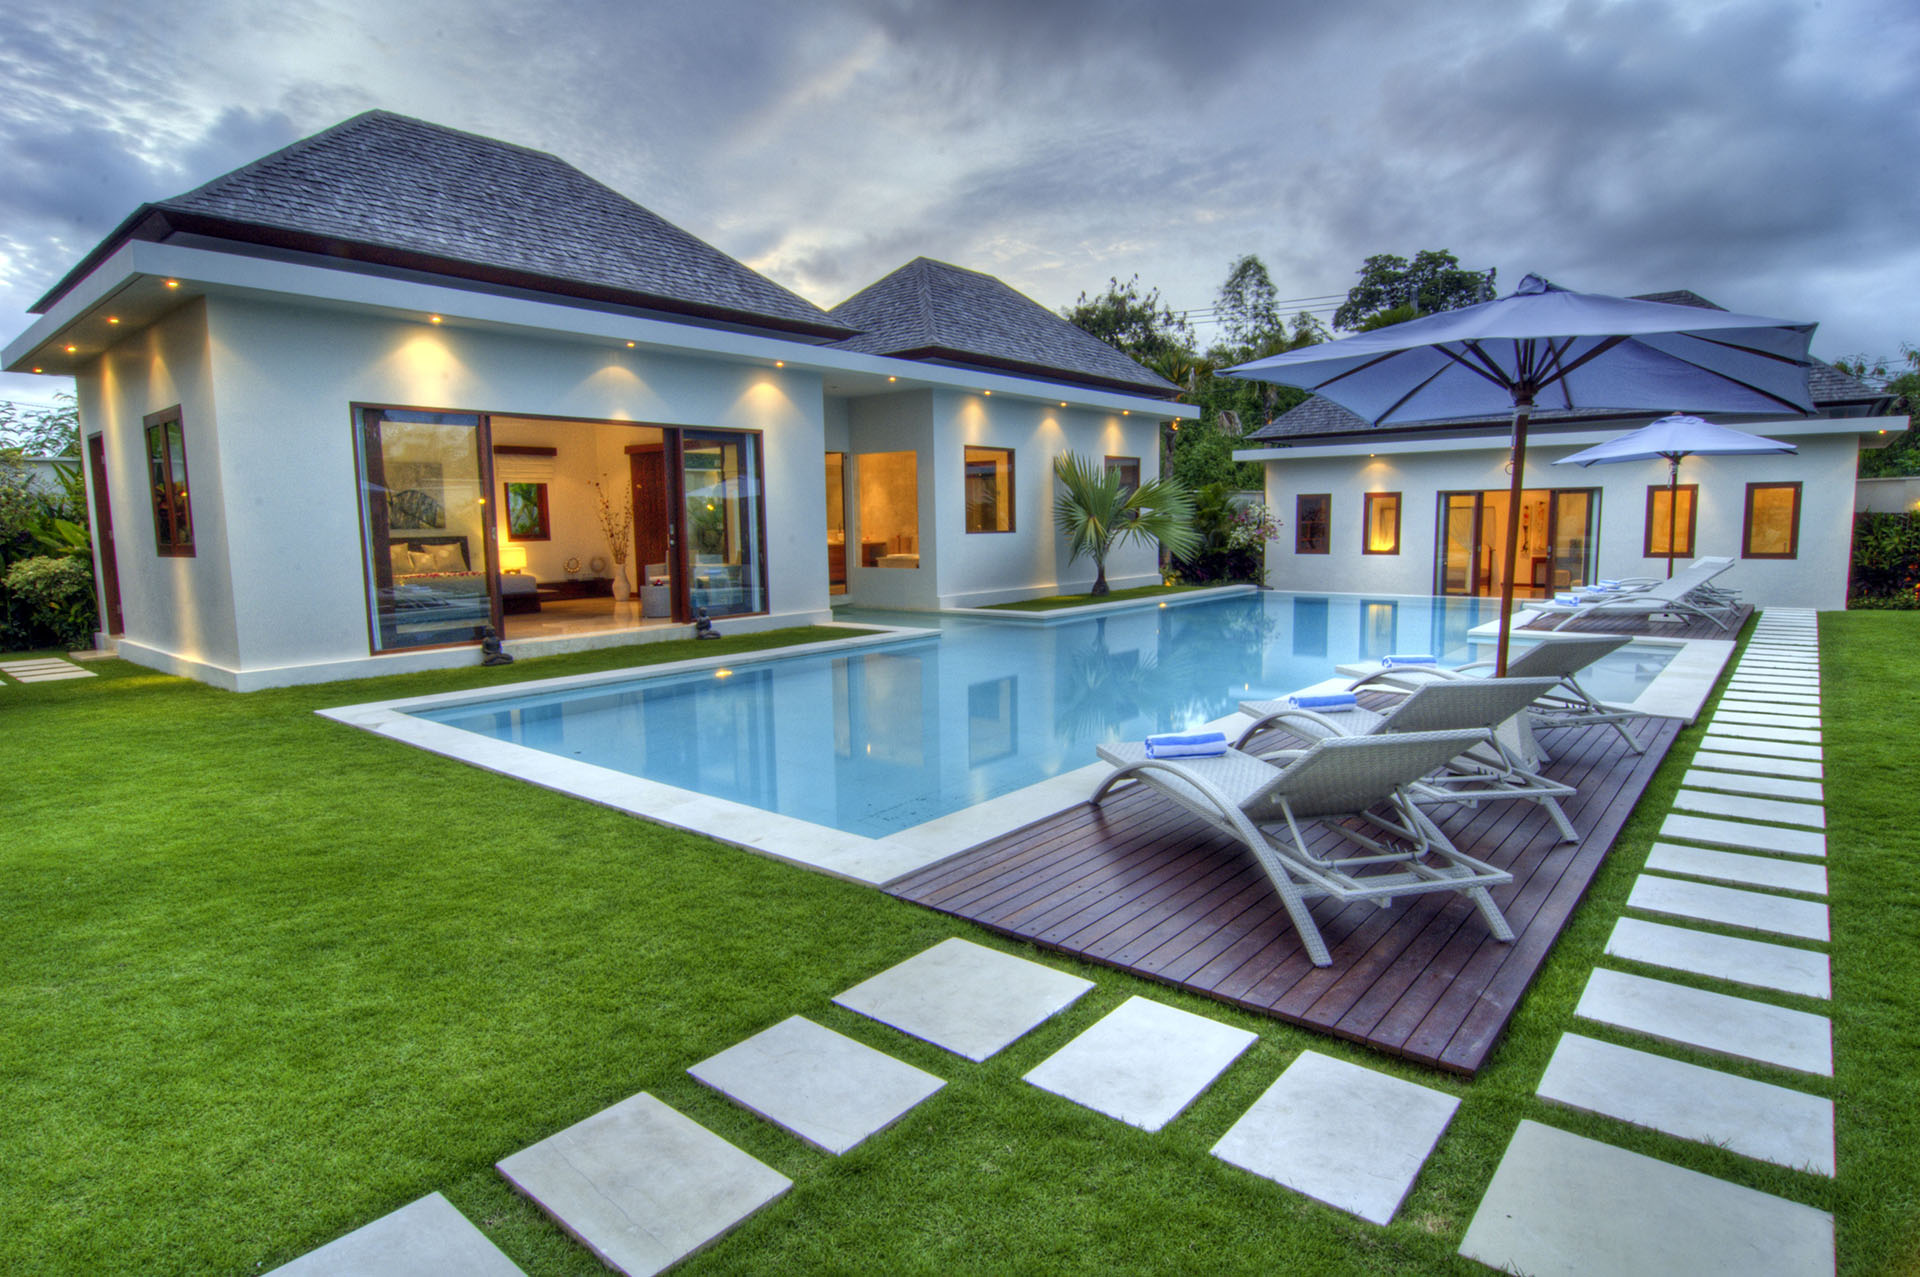 Splendid Private Swimming Pools That Everyone Will Love